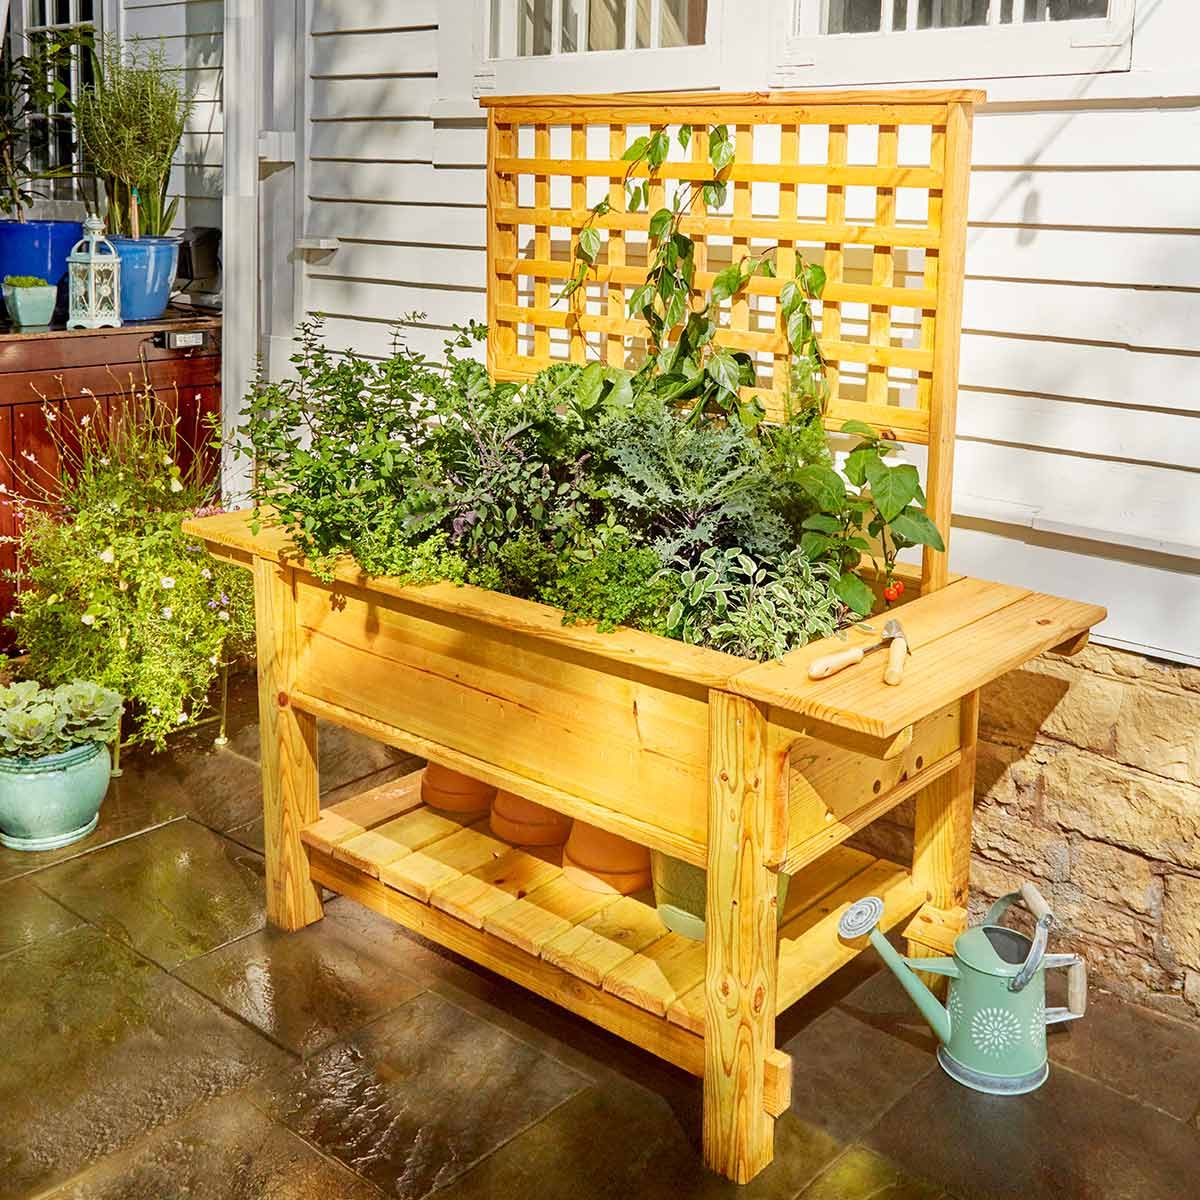 Wood projects for outdoors